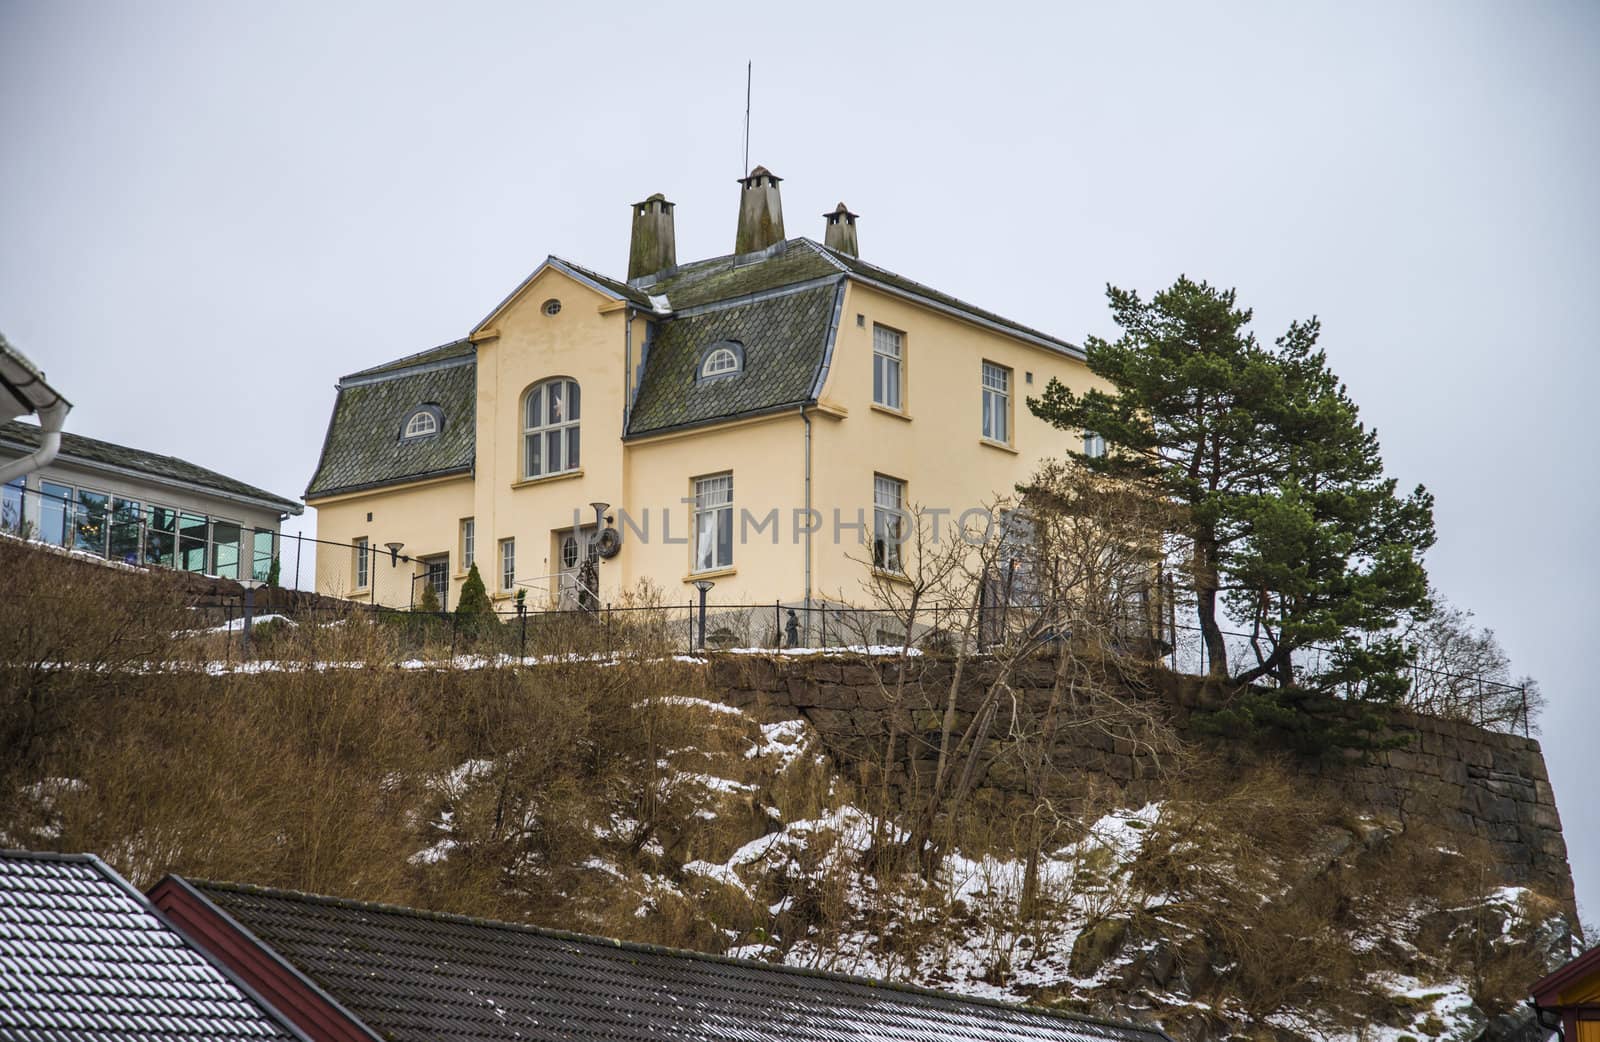 "Petersborg" was built by Ole Dahl in 1914 and which was a rich shoemaker, the building is walled up in bricks and plastered. the house is situated on top of a rocky hill with a view to the harbor and  Halden city, the image is shot in december 2012